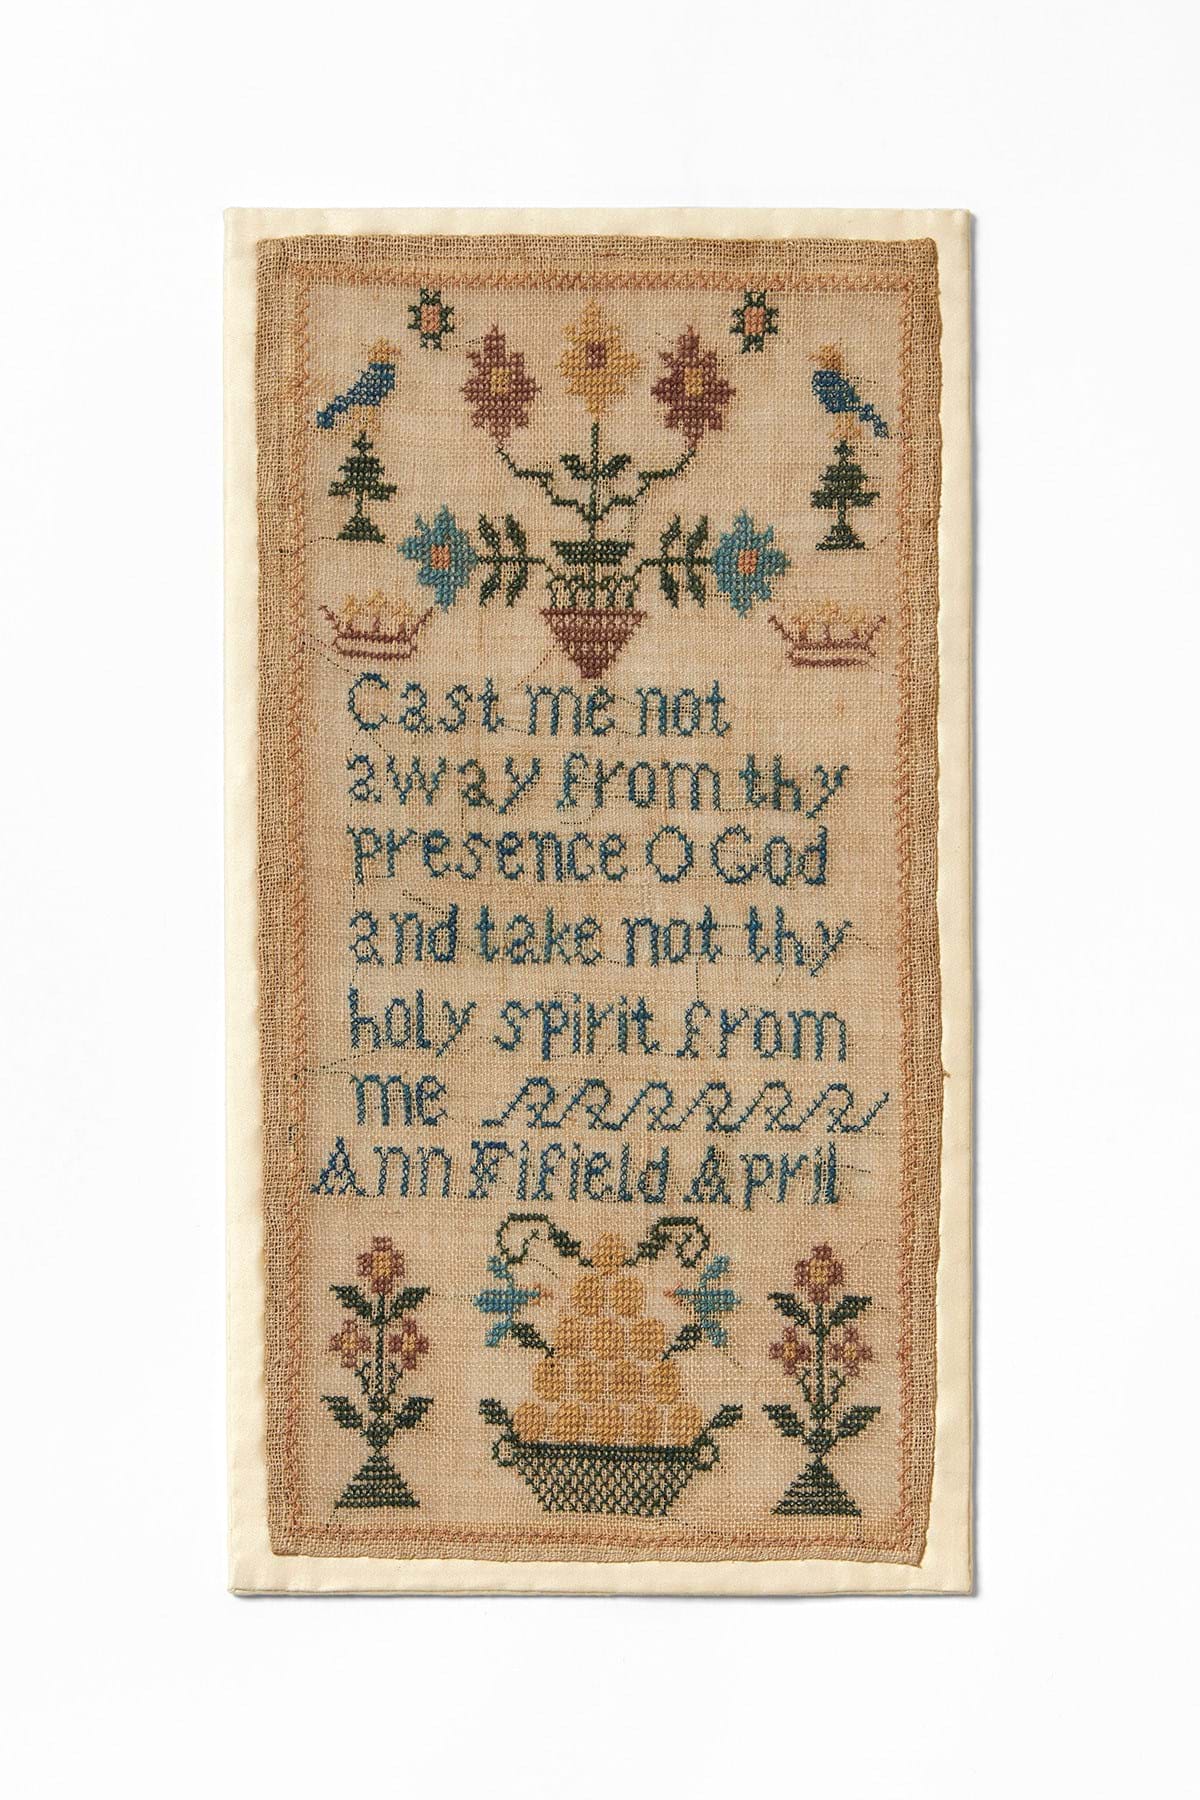 A cream canvas sampler with floral designs and writing embroidered, which reads 'cast me not away from thy presence O God, and take not thy holy spirit from me - Ann Fifield April'